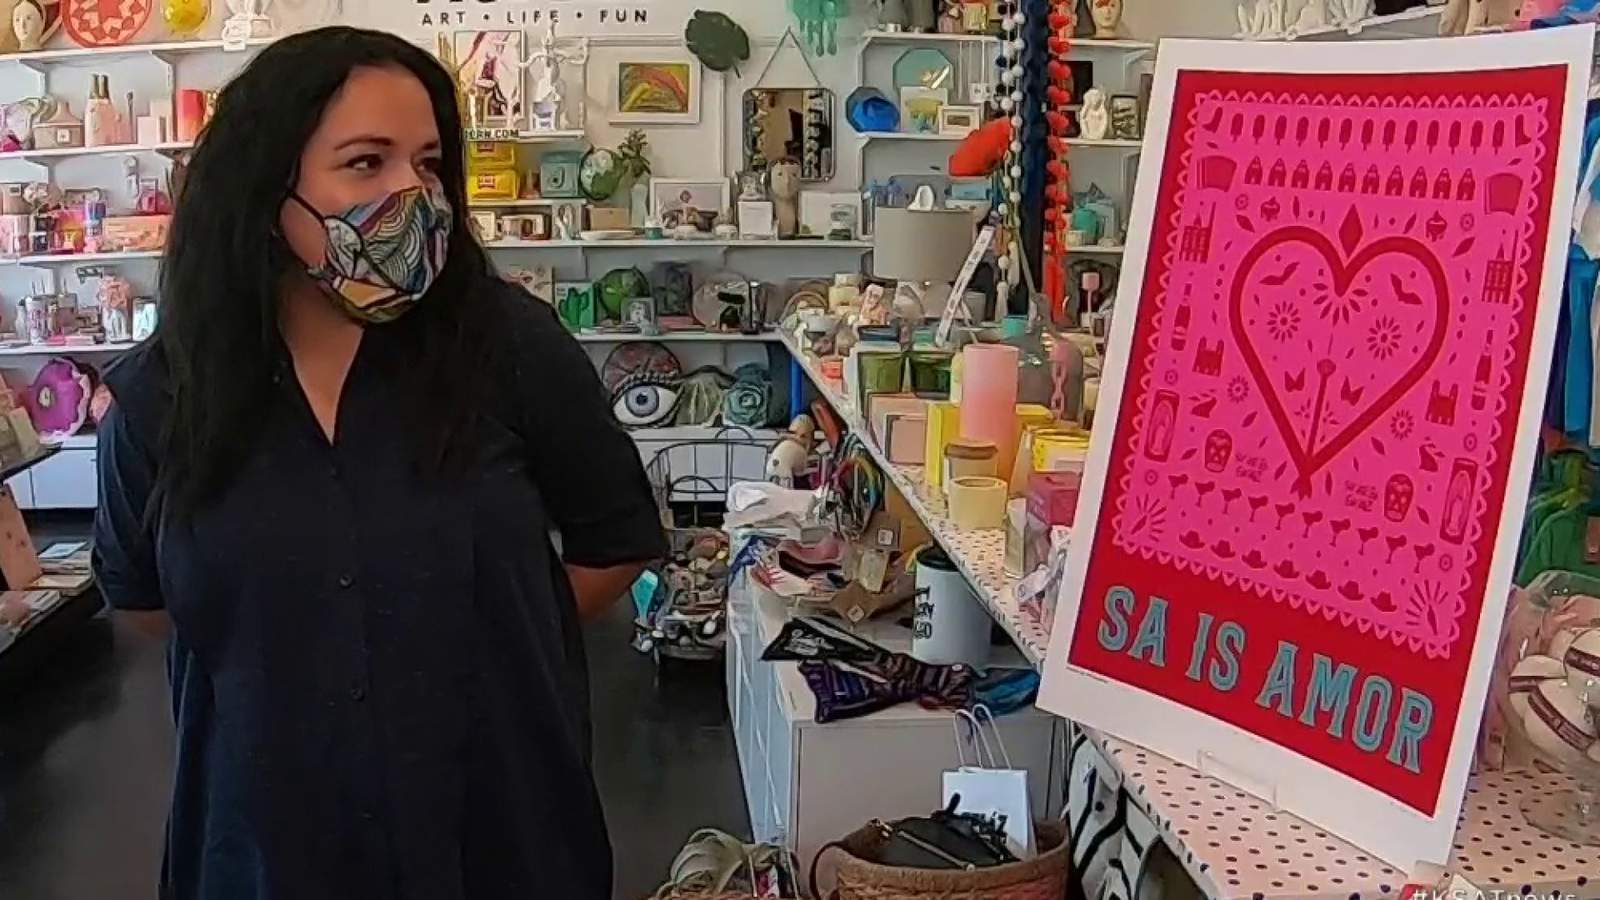 Artist designs a love letter to San Antonio to raise money for students